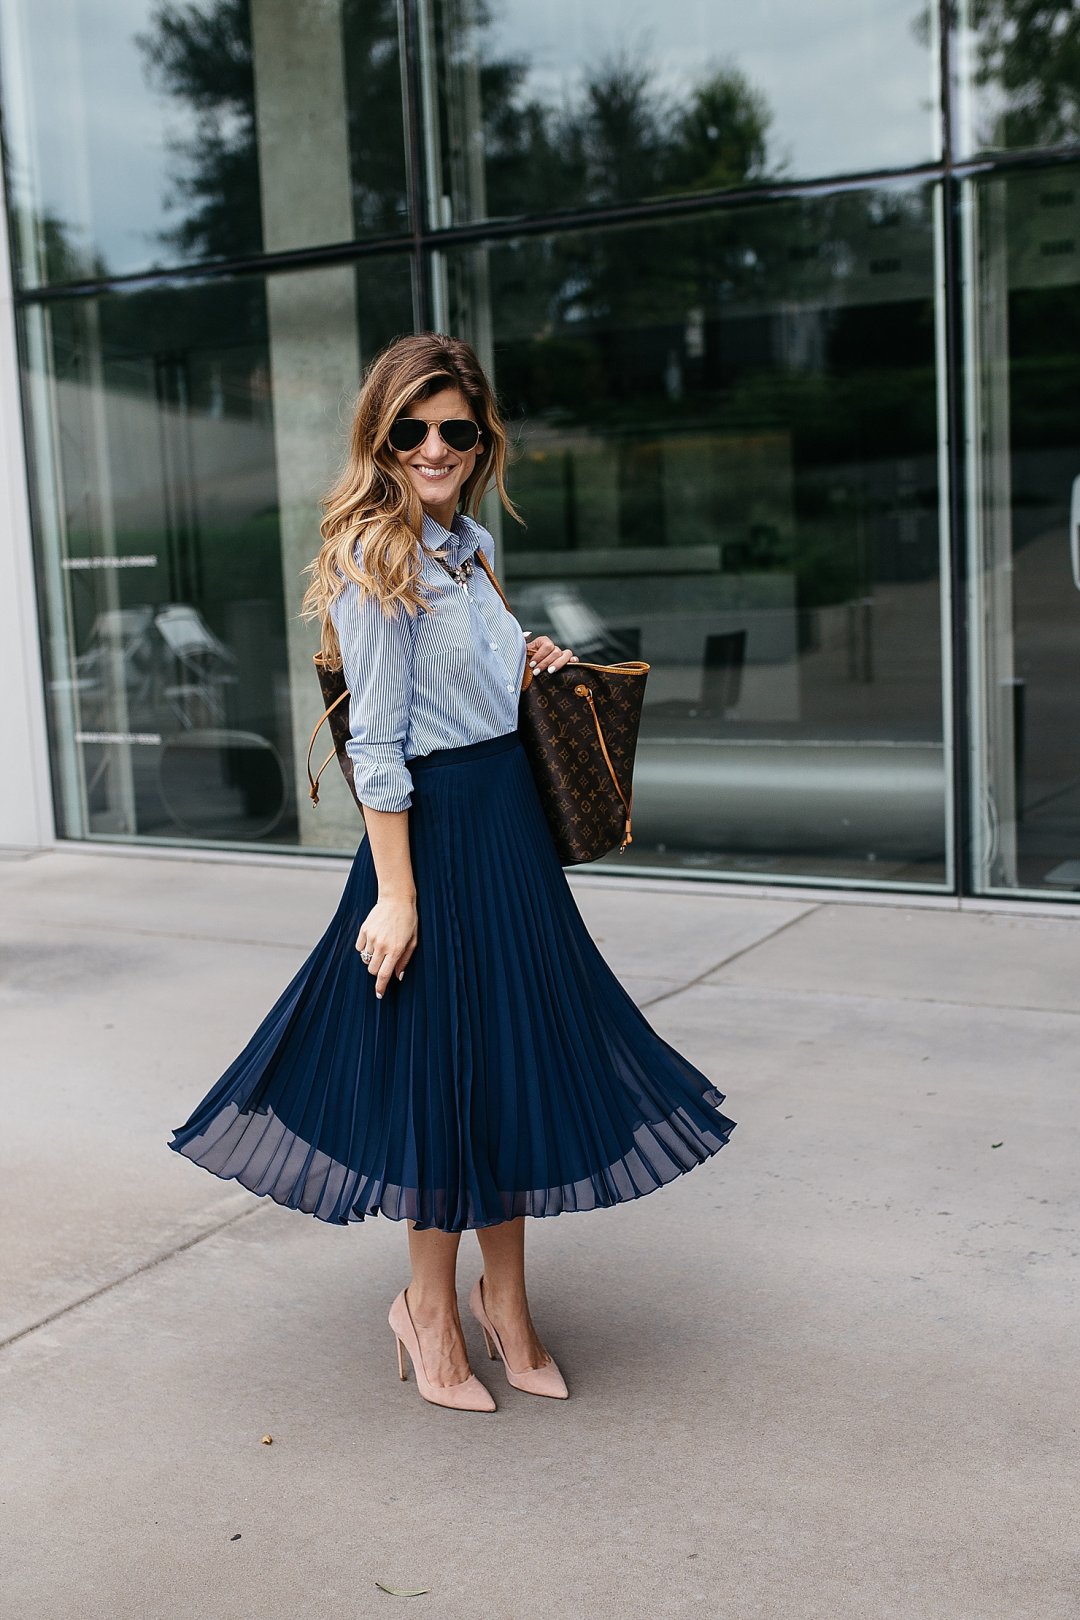 business casual outfit idea, incorporating trends at work, how to be stylish at the office, pleated midi skirt outfit, navy and blush pink outfit, business professional outfit idea, spring work wear outfit